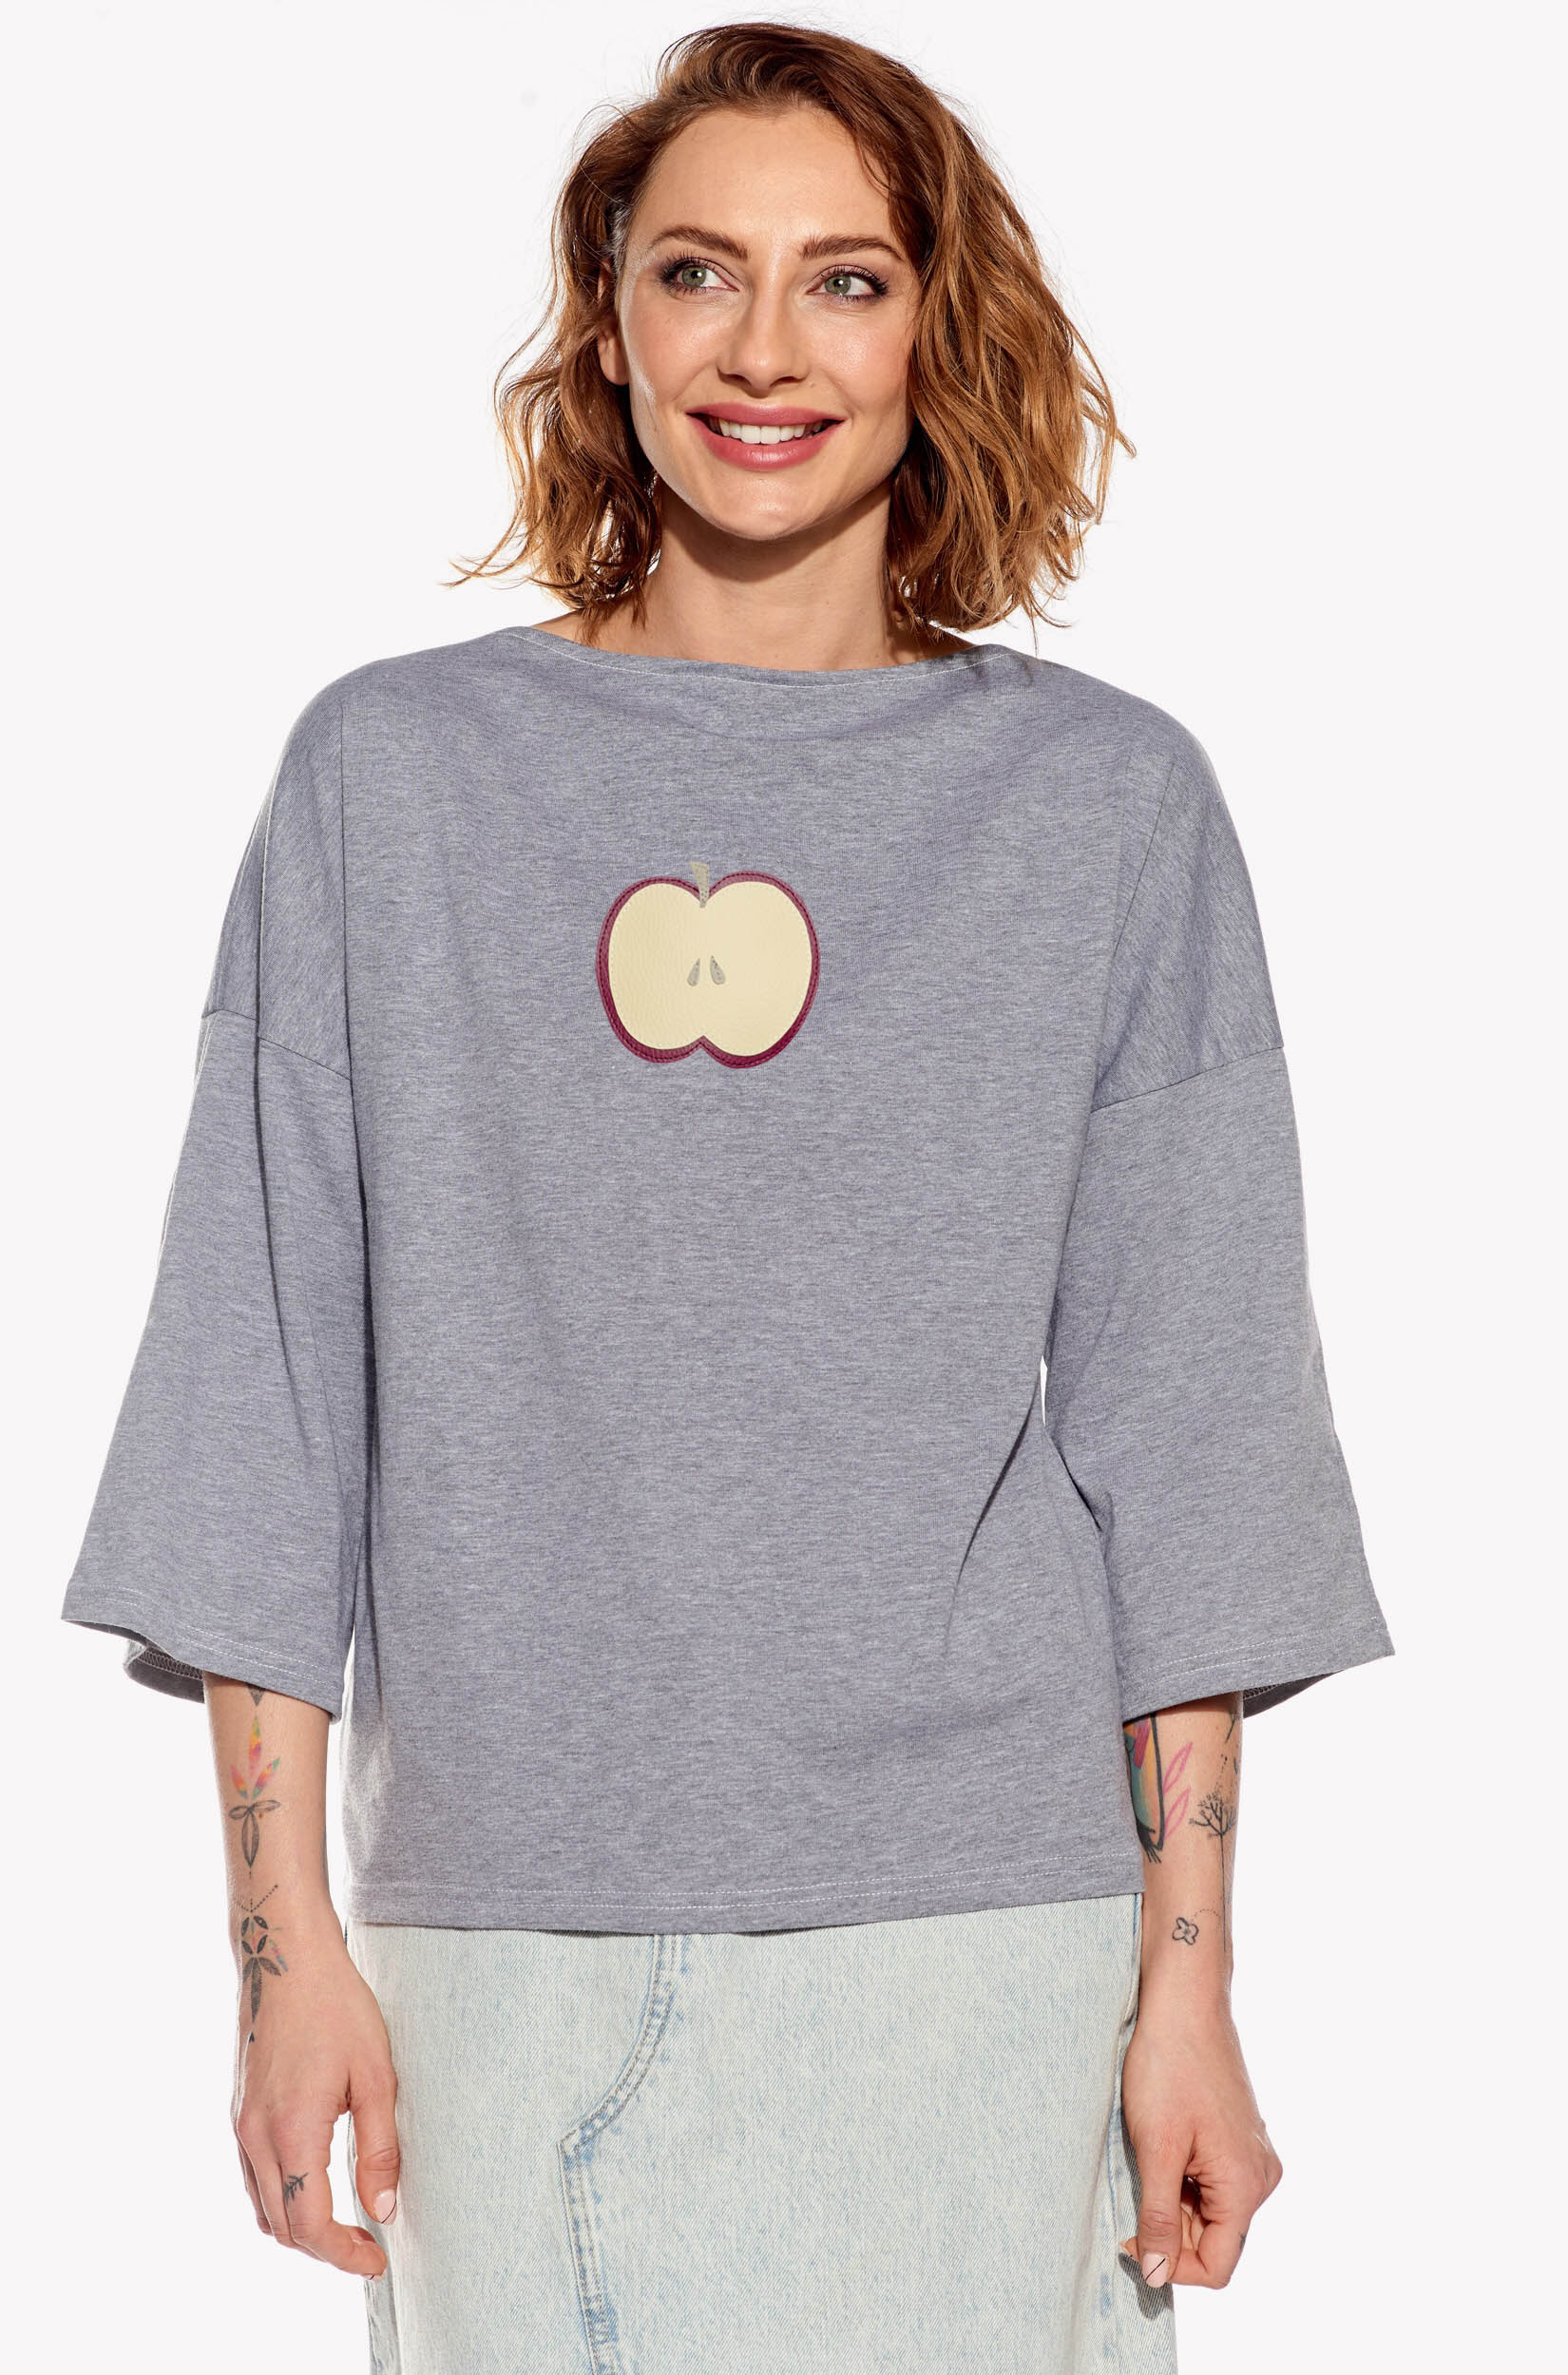 Shirt with apple